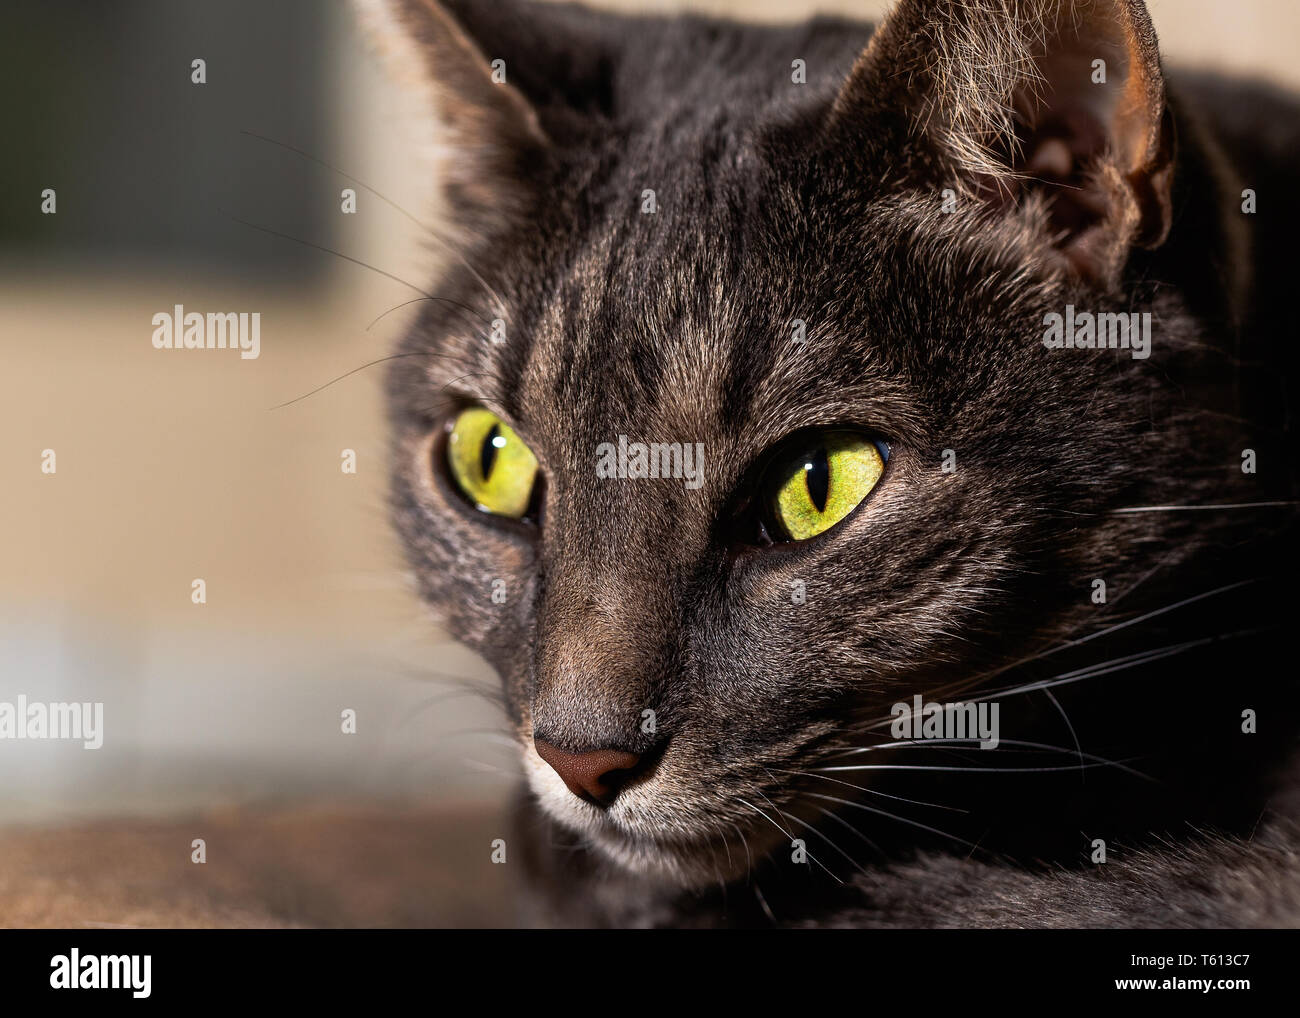 Close up, detail portrait of a pet tabby cat. Stock Photo